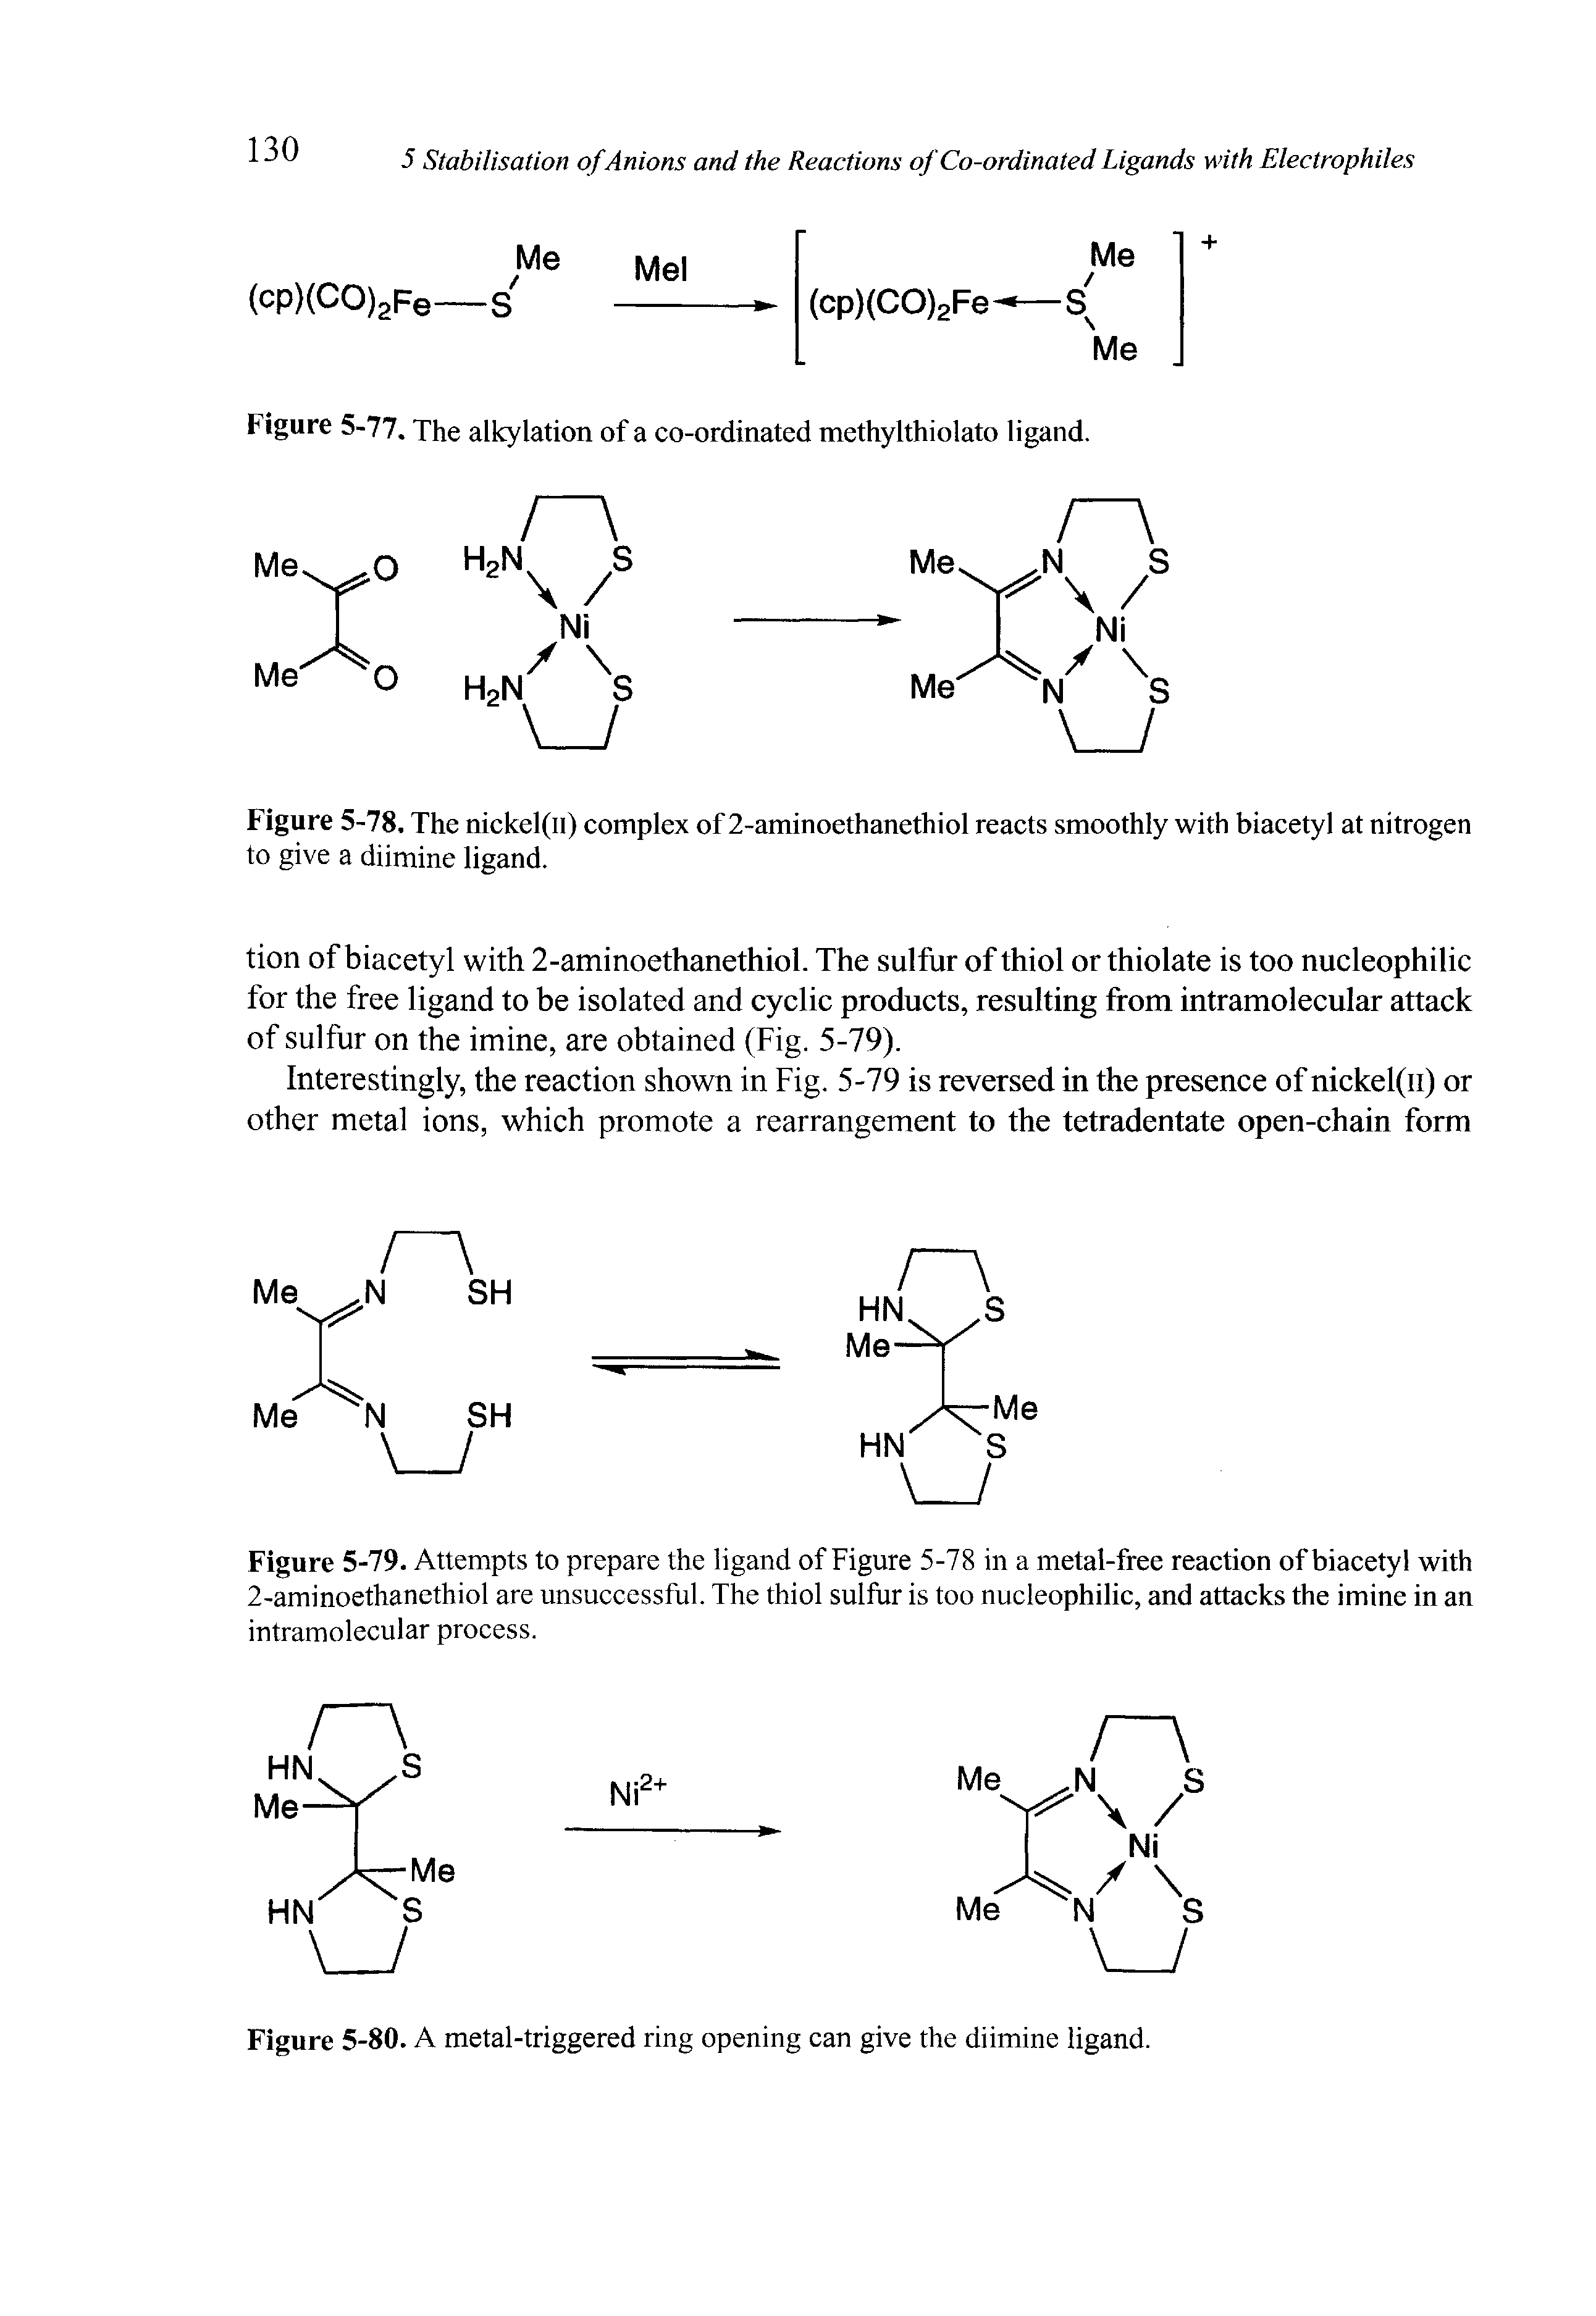 Figure 5-79. Attempts to prepare the ligand of Figure 5-78 in a metal-free reaction of biacetyl with 2-aminoethanethiol are unsuccessful. The thiol sulfur is too nucleophilic, and attacks the imine in an intramolecular process.